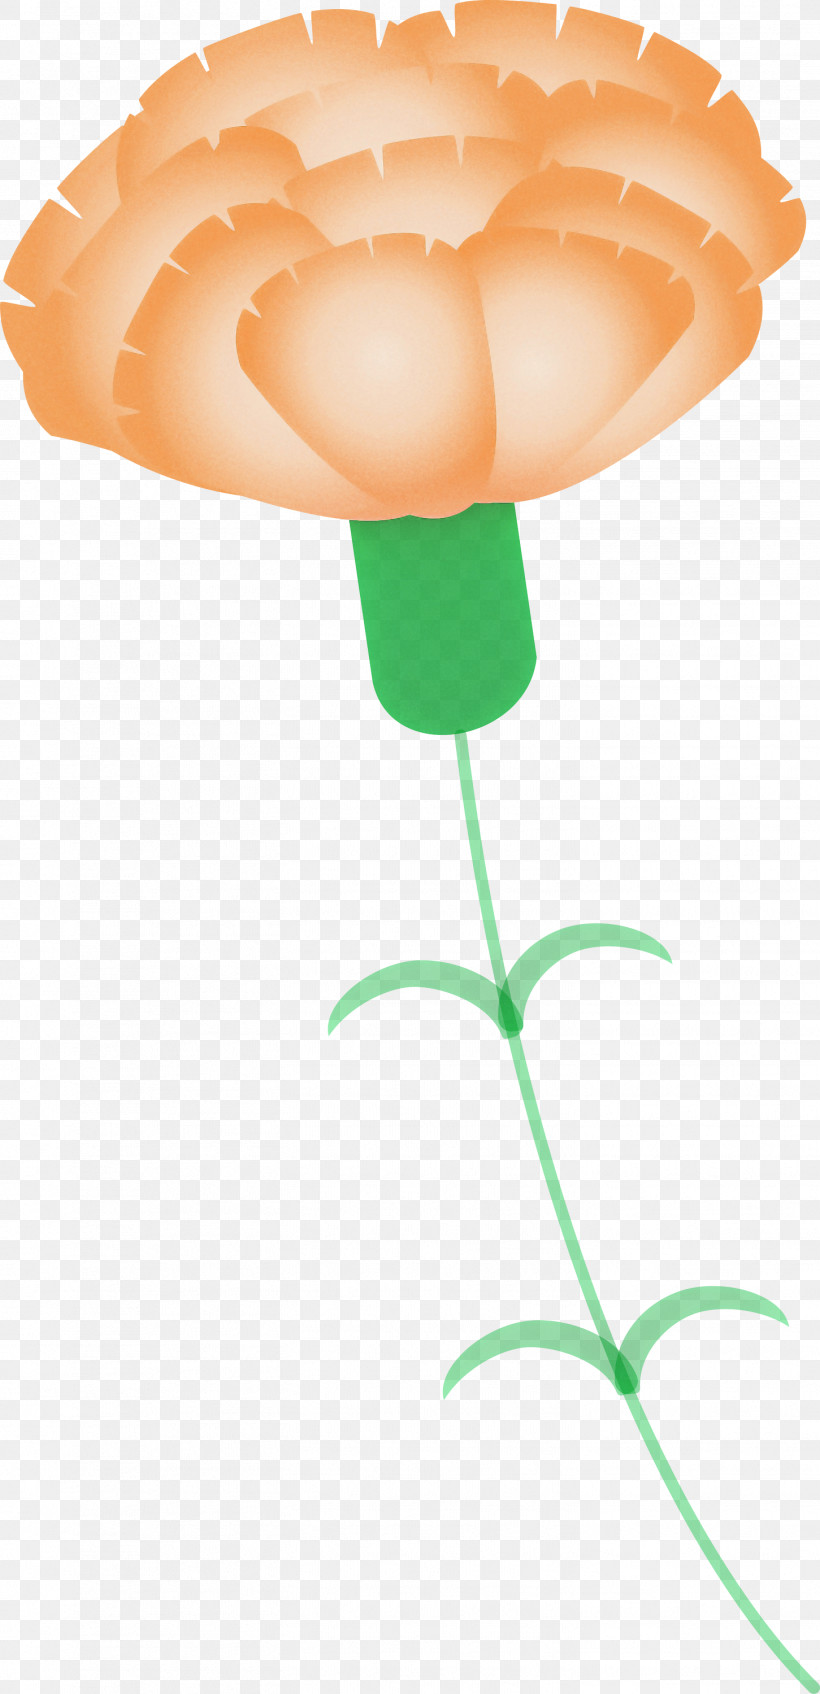 Mothers Day Carnation Mothers Day Flower, PNG, 1451x2999px, Mothers Day Carnation, Flower, Mothers Day Flower, Orange, Plant Download Free